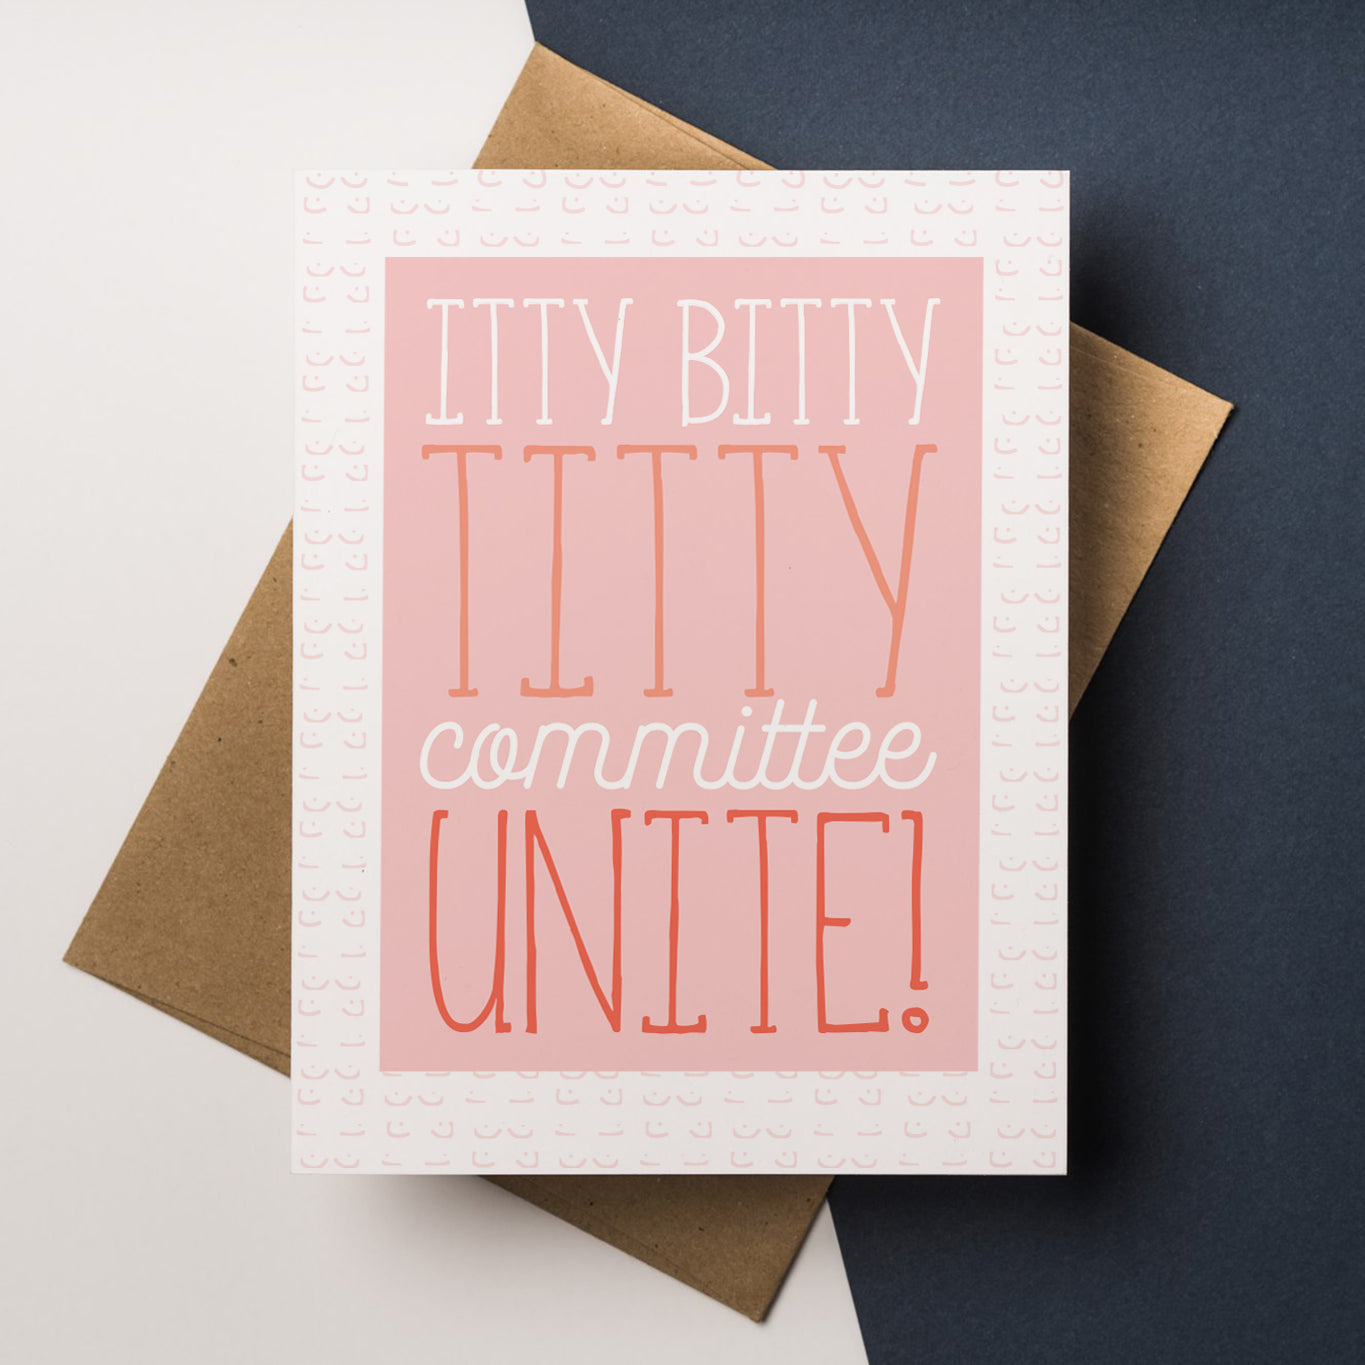 A funny and empowering friendship greeting card that reads "Itty Bitty Titty Committee Unite!"